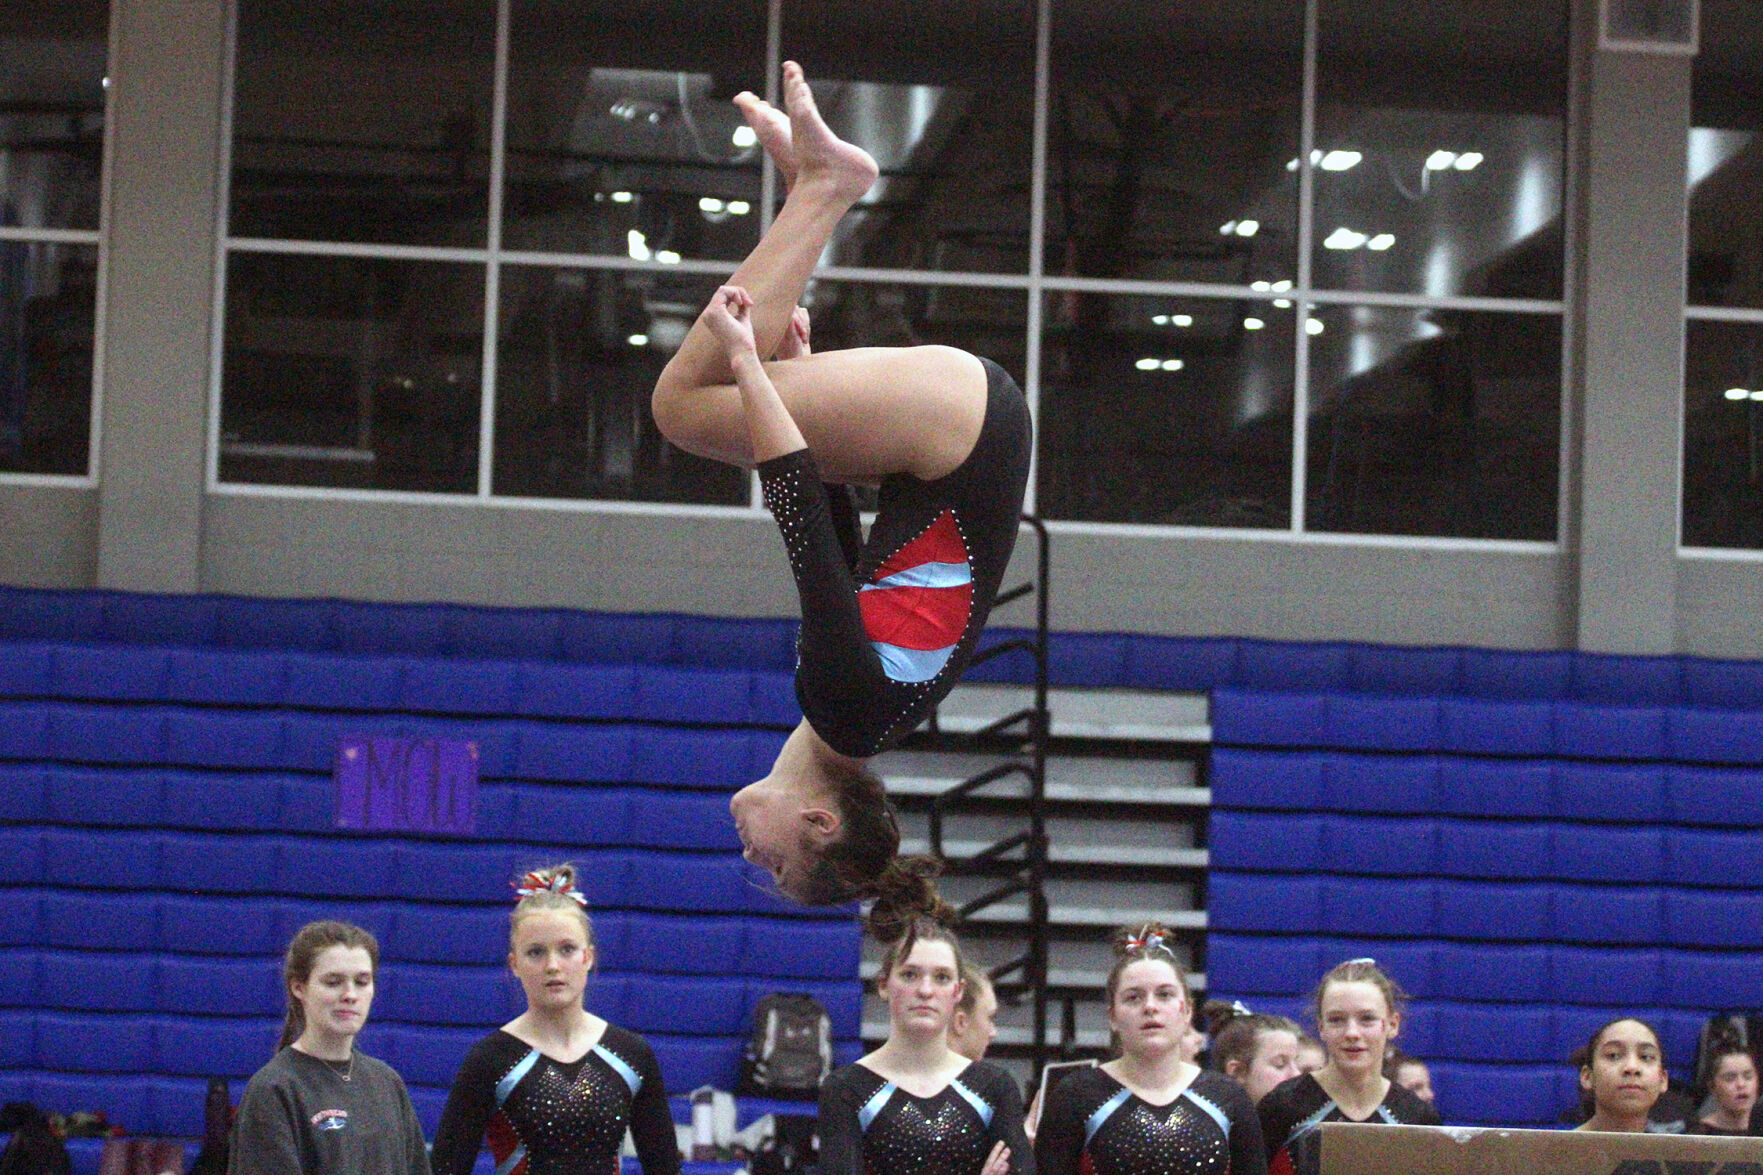 Kaylee Stoeger Dominates Gymnastics Competitions with All-Around Victory and State Title Defense